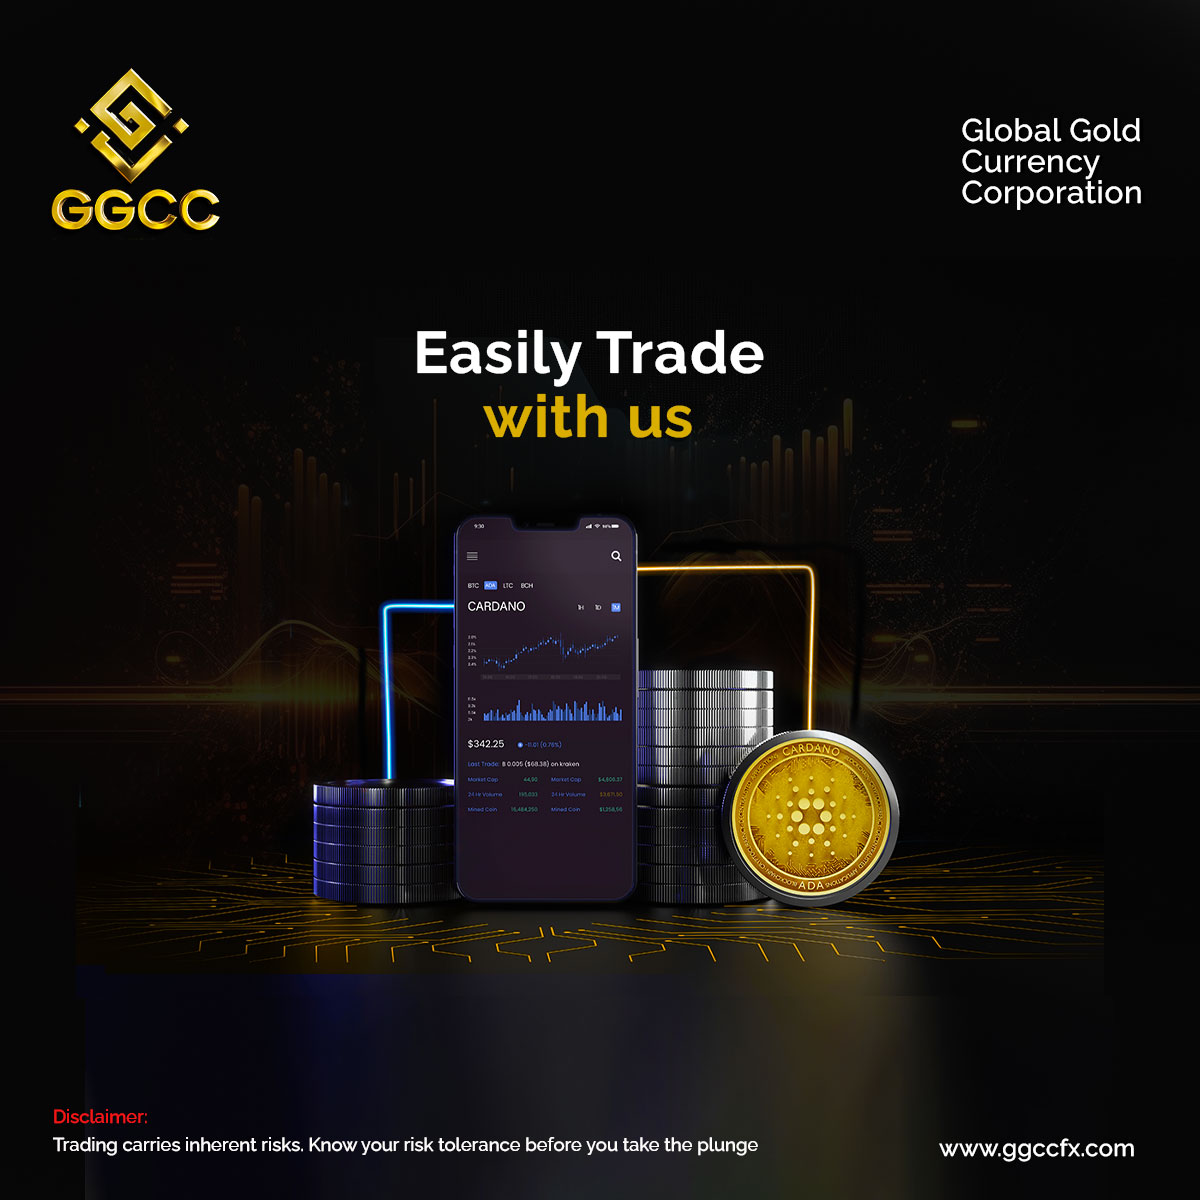 Our platform makes trading easy, empowering you to navigate the markets effortlessly. Join us on the journey to financial success 

#TradeWithEase #FinancialFreedom #Trading # #Forex #StockMarket #DayTrading #Investing #TechnicalAnalysis #FinancialMarkets #GGCCfx